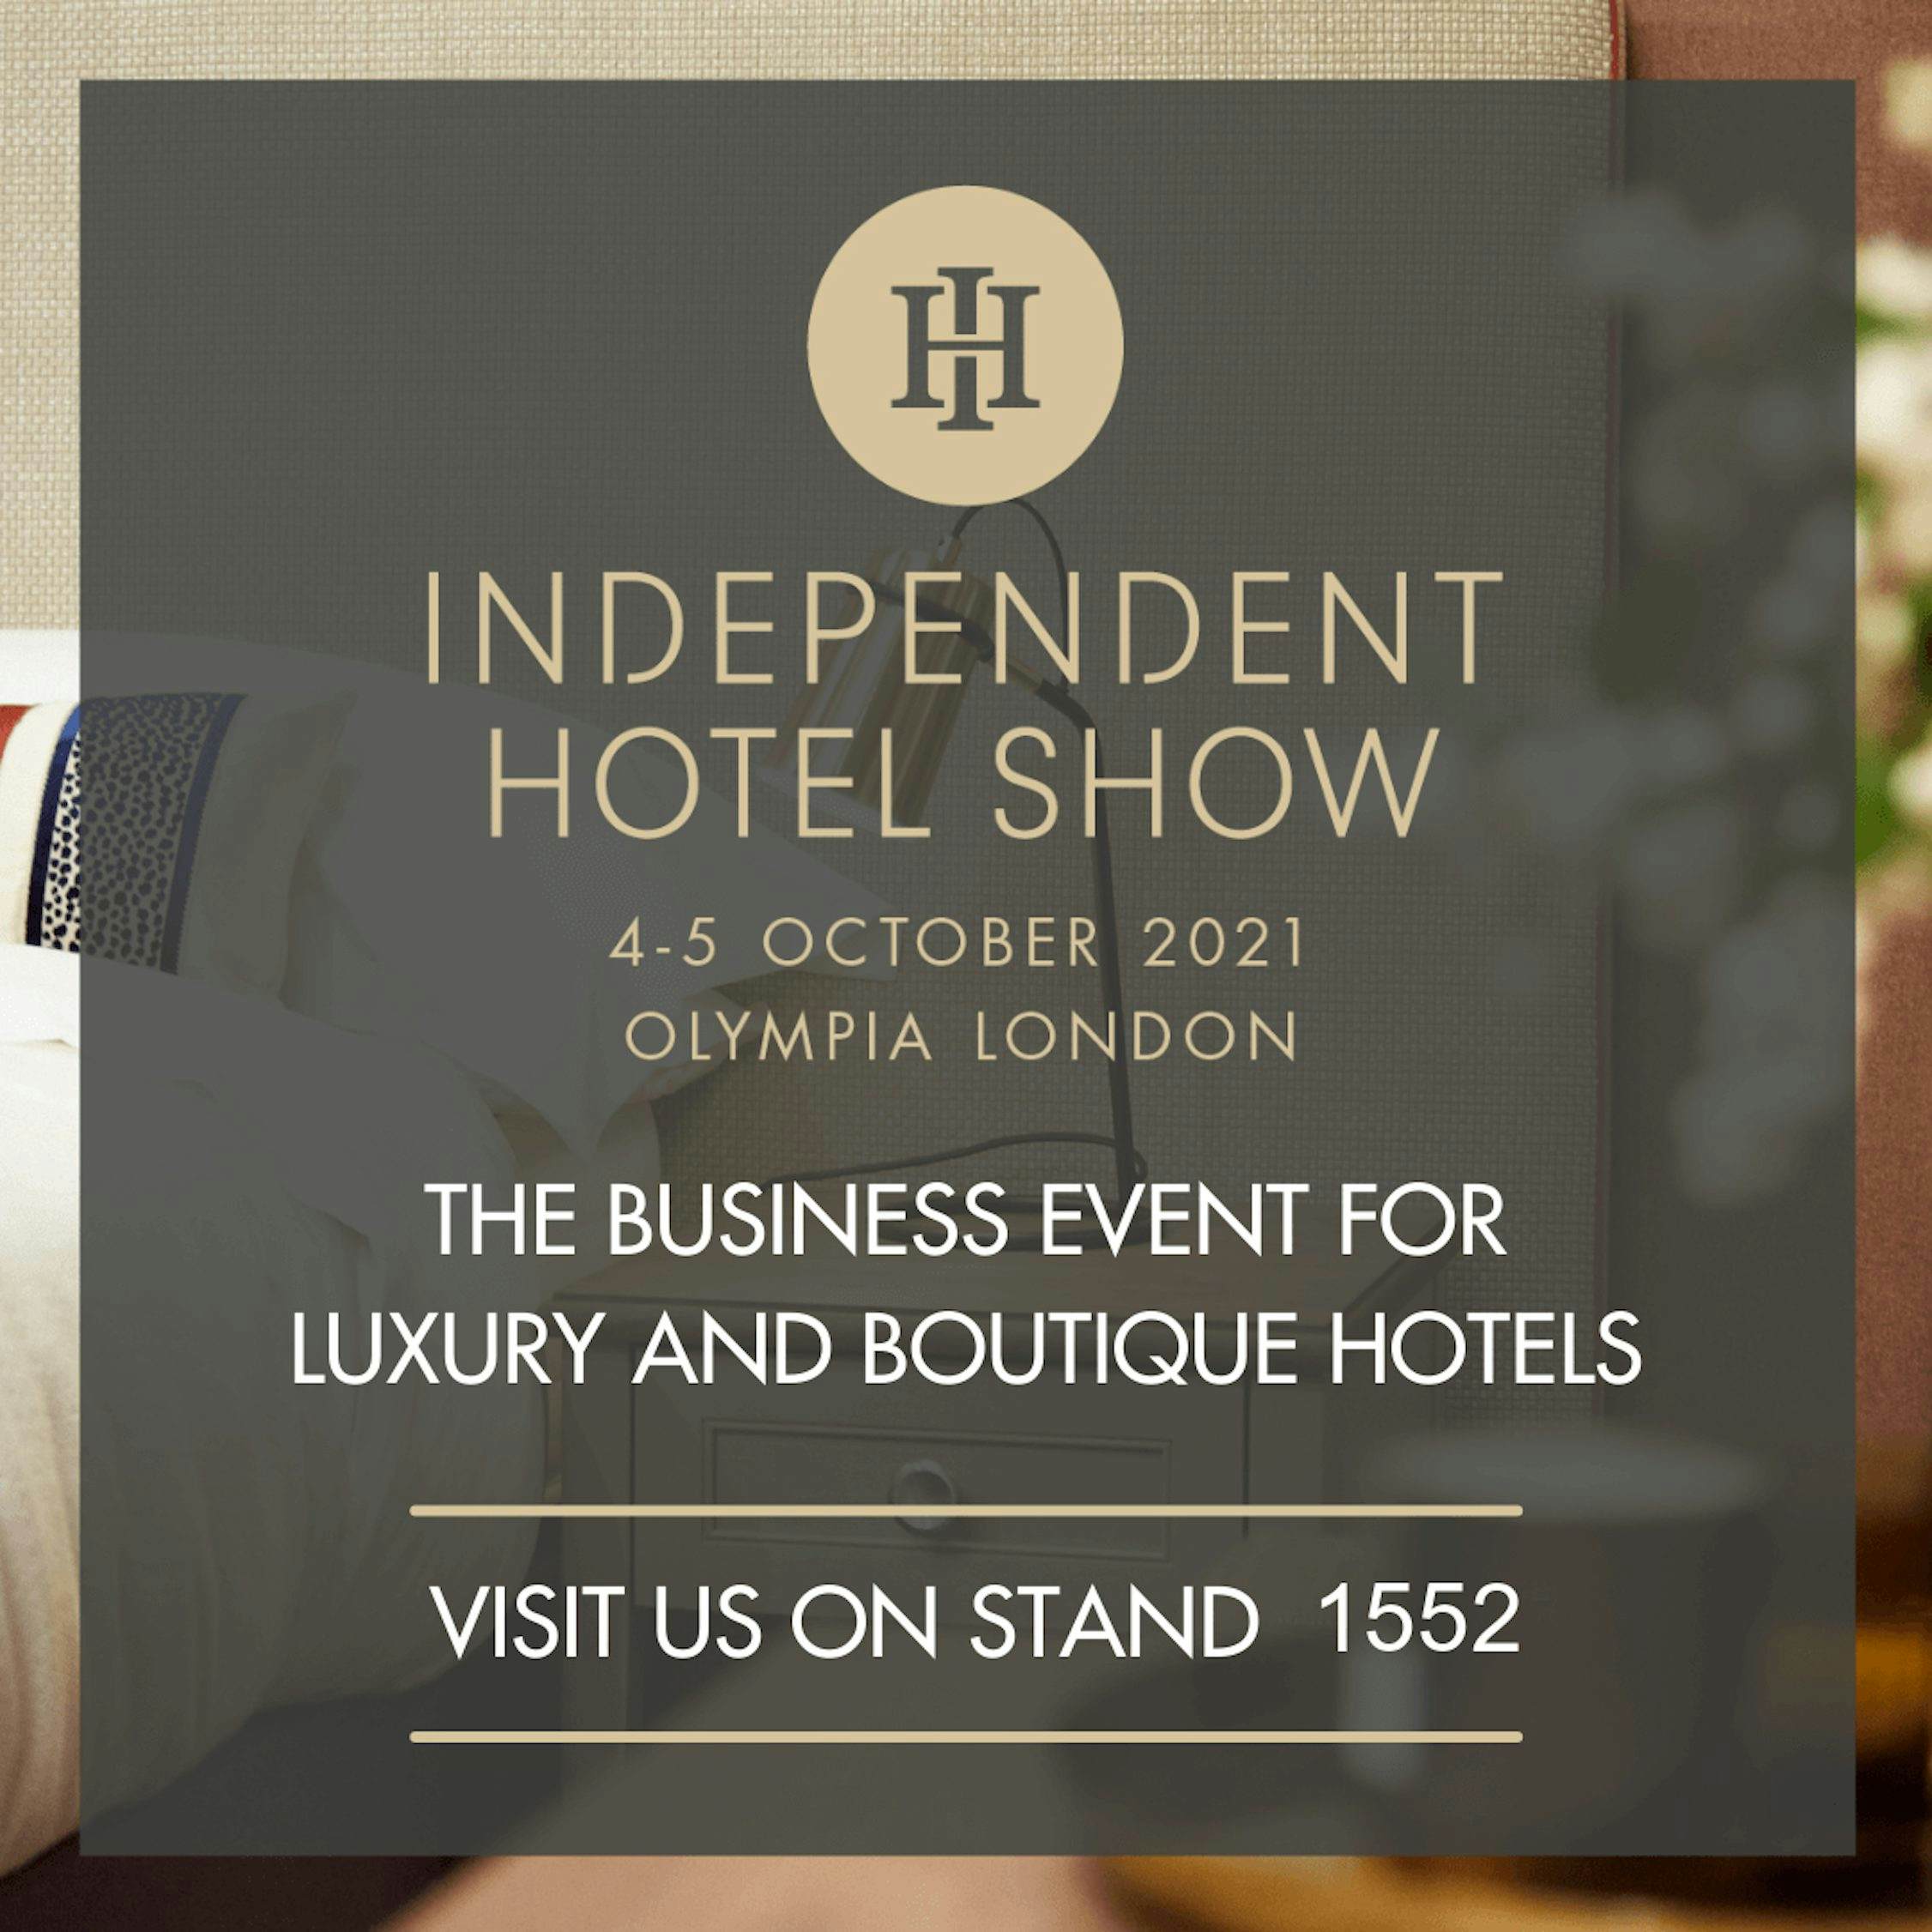 Forbes Professional is excited to return to The Independent Hotel Show.